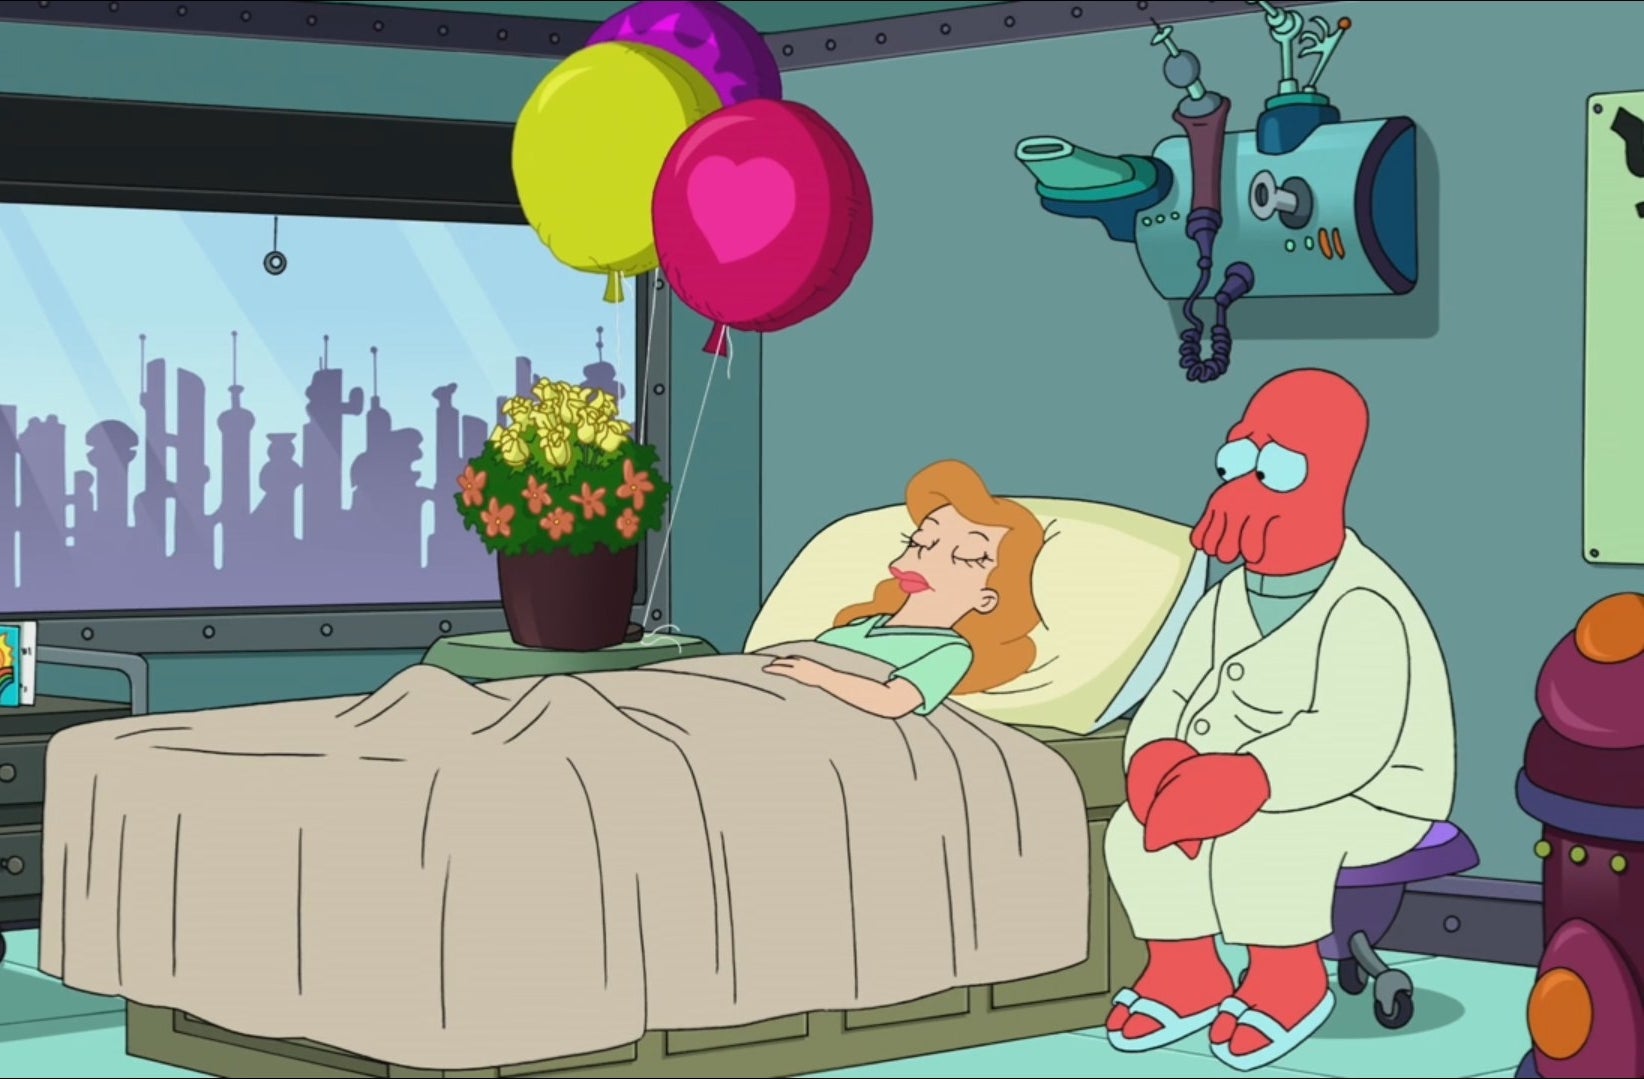 Marianne lies in a hospital bed with Zoidbeg, a big red squid, sits next to her looking worried.